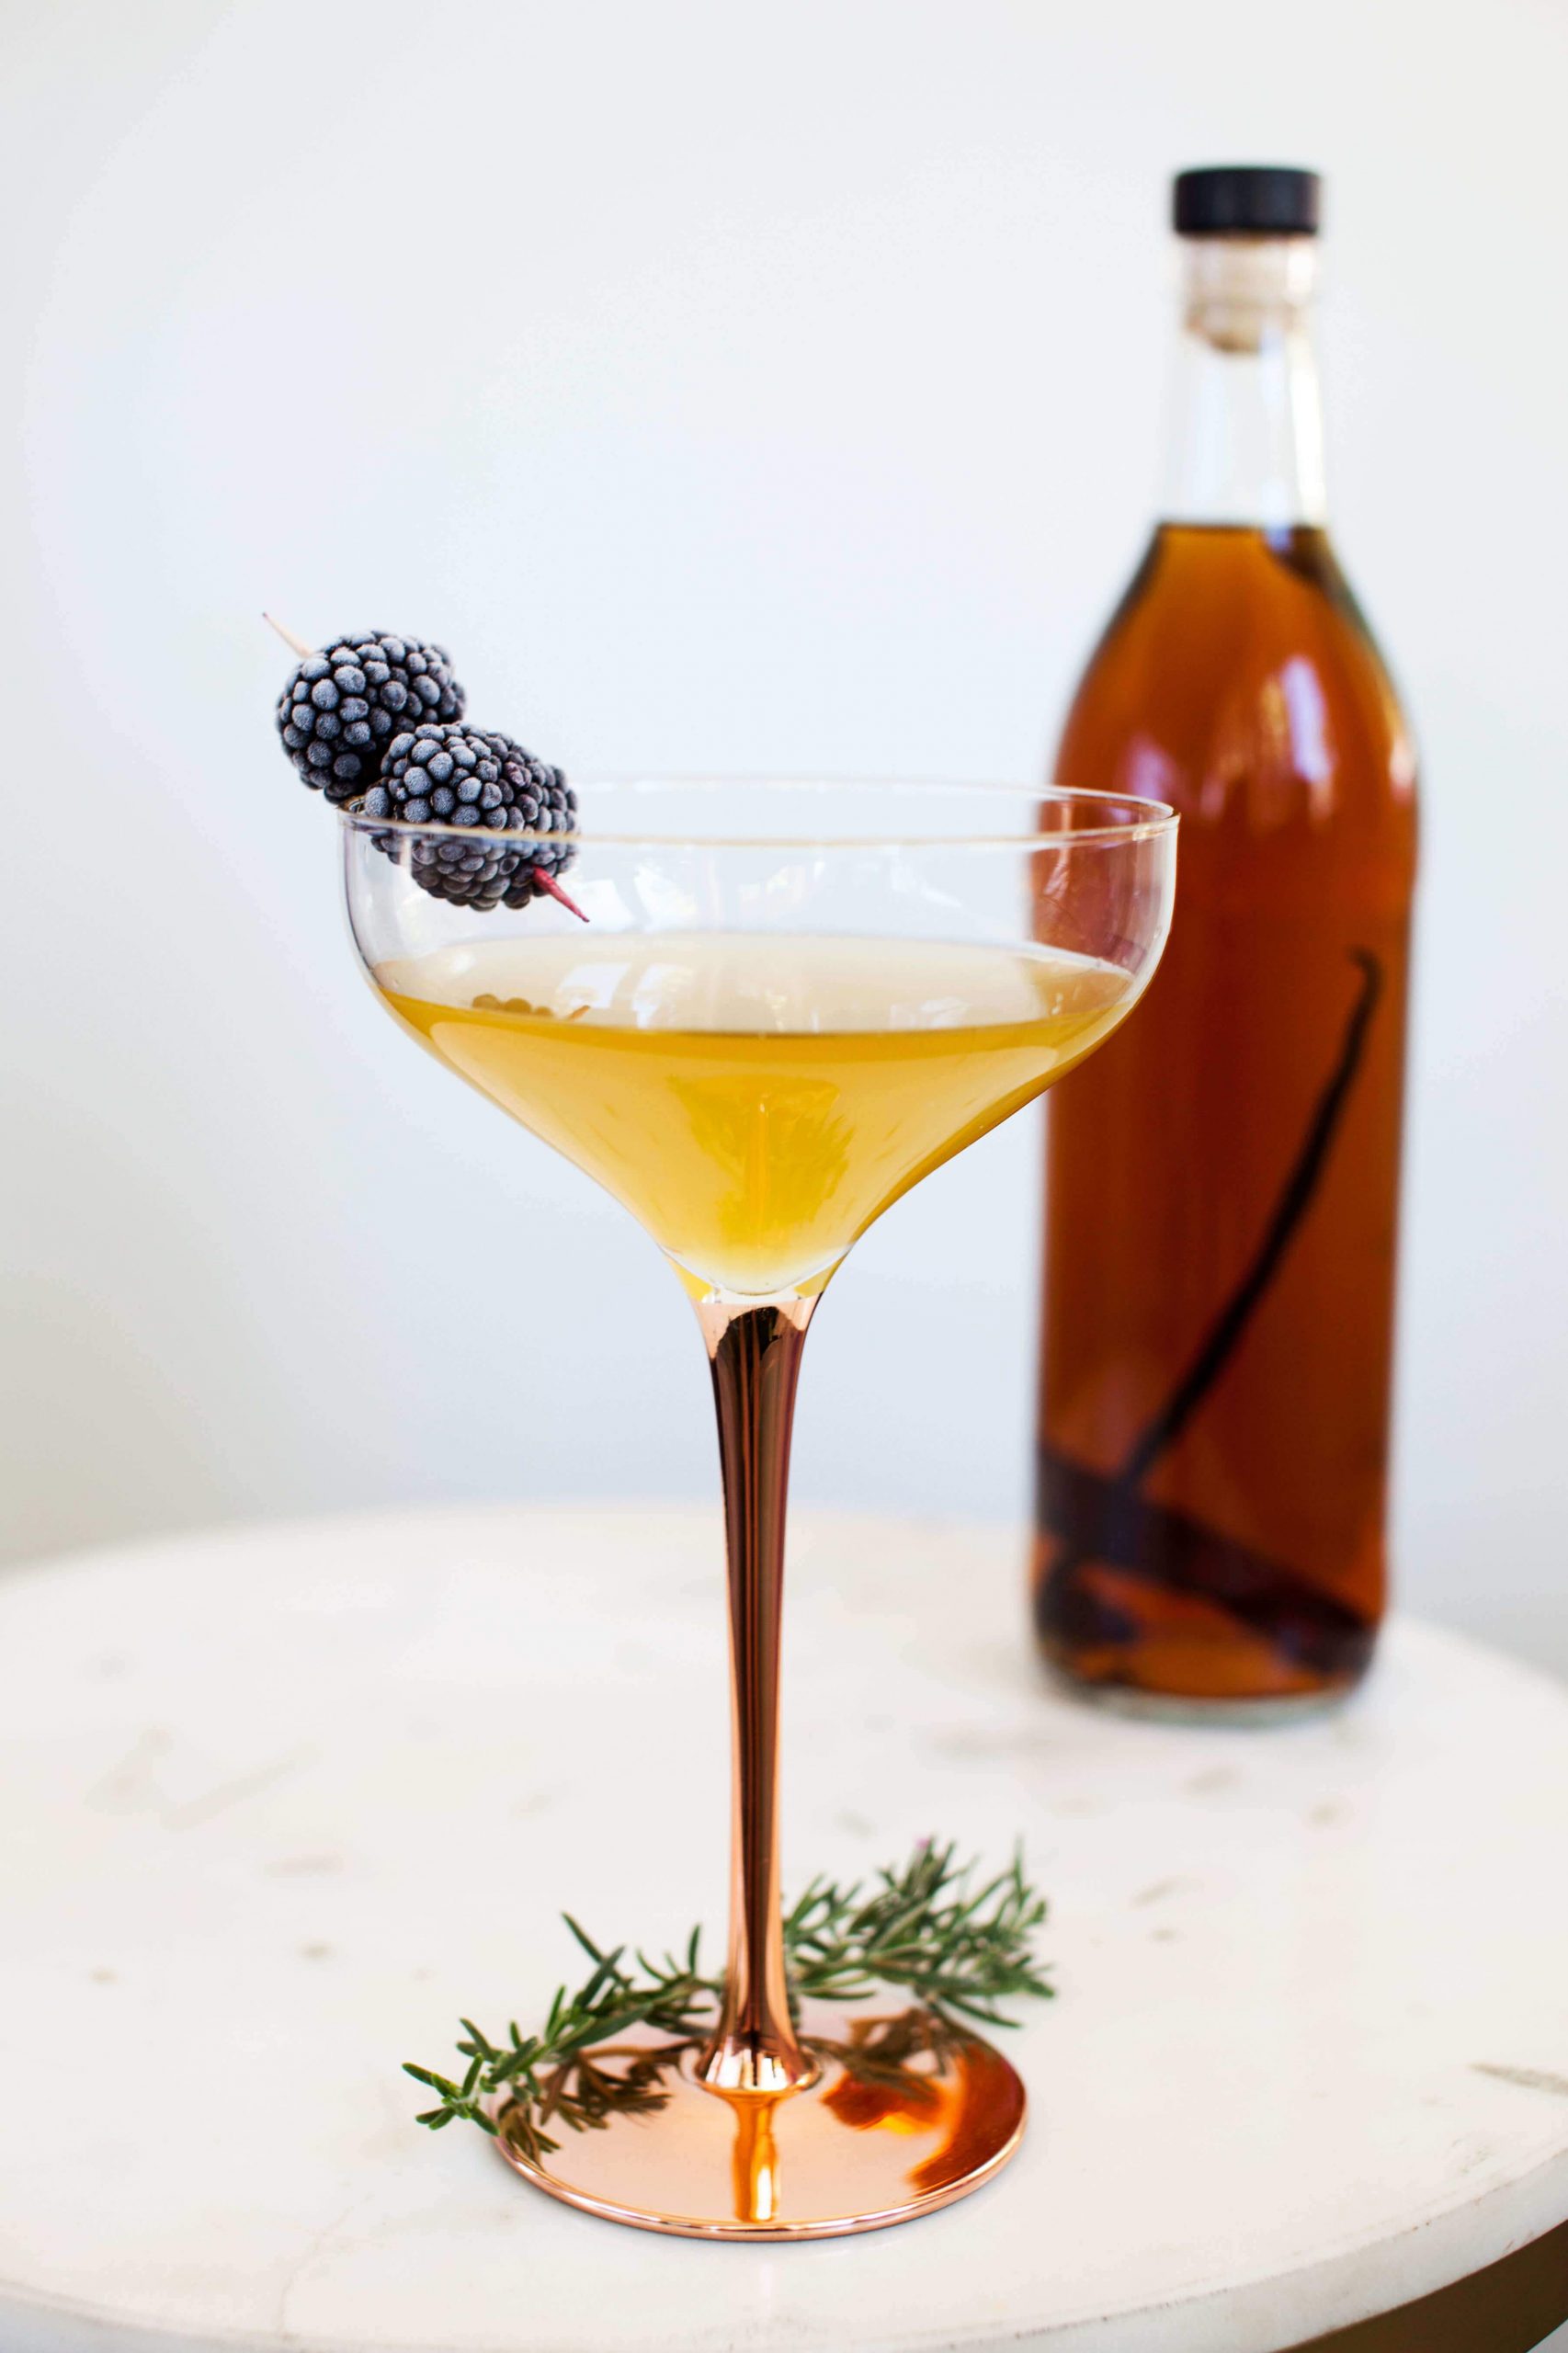 How to Make a Sparkling Spiced Rum Cocktail